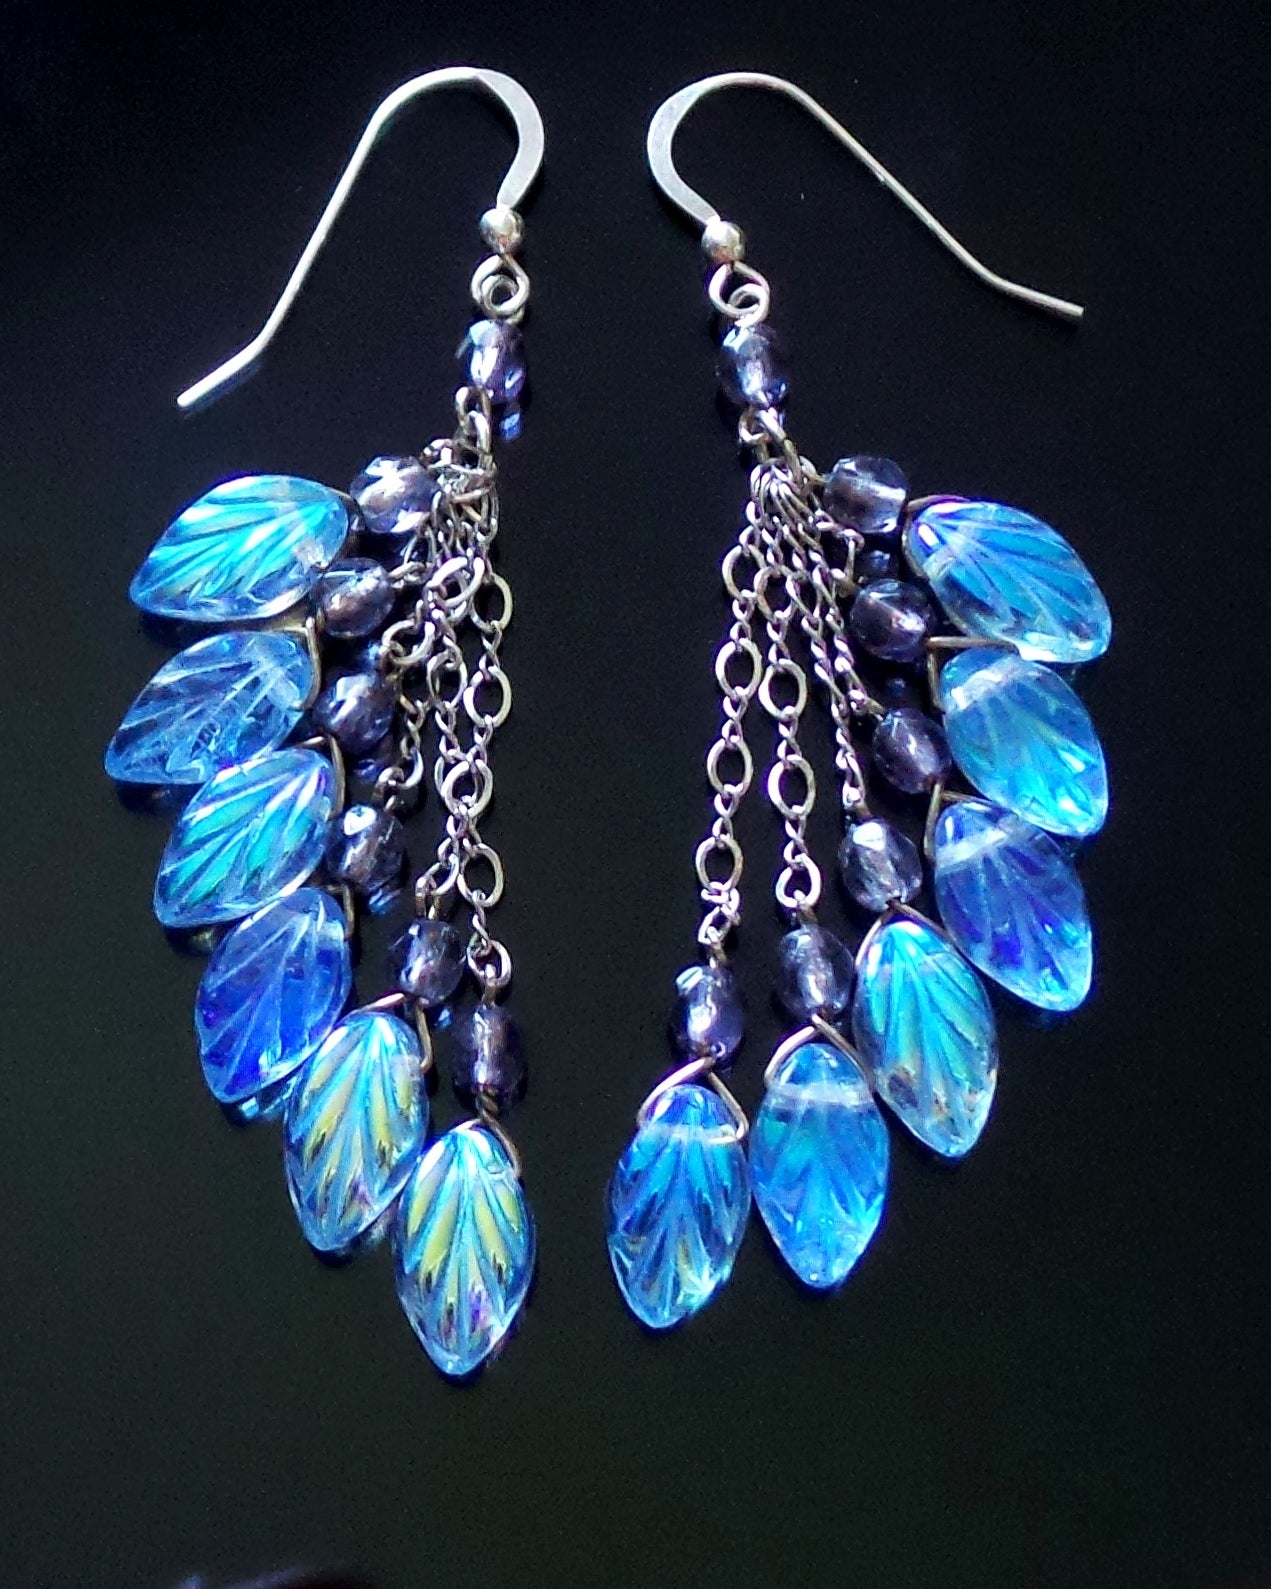 Long Blue Leaf Cluster Earrings, Sterling Silver, Czech Glass, Opal Blue Glass Leaves, lavender, Upcycled Sterling Silver